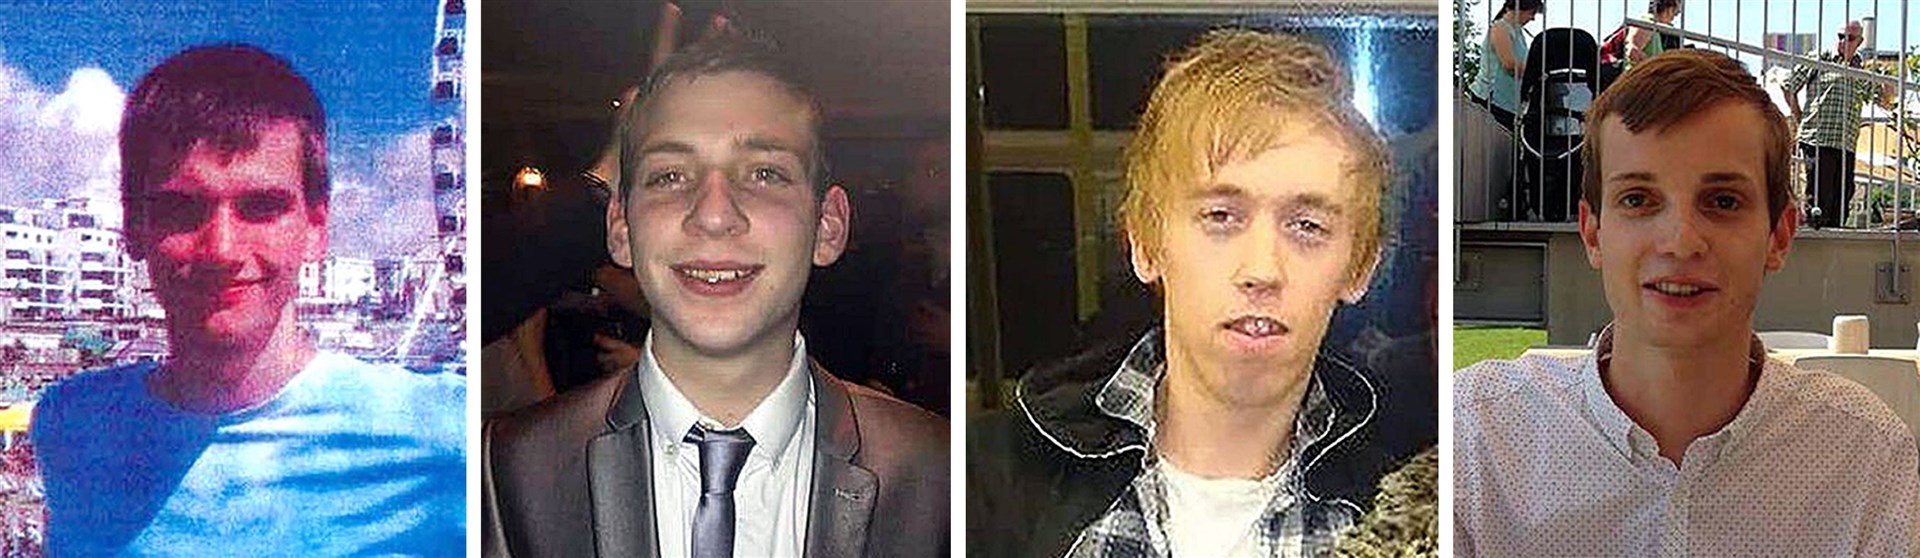 (left to right) Daniel Whitworth, Jack Taylor, Anthony Walgate and Gabriel Kovari were murdered by Stephen Port (Met Police/PA)